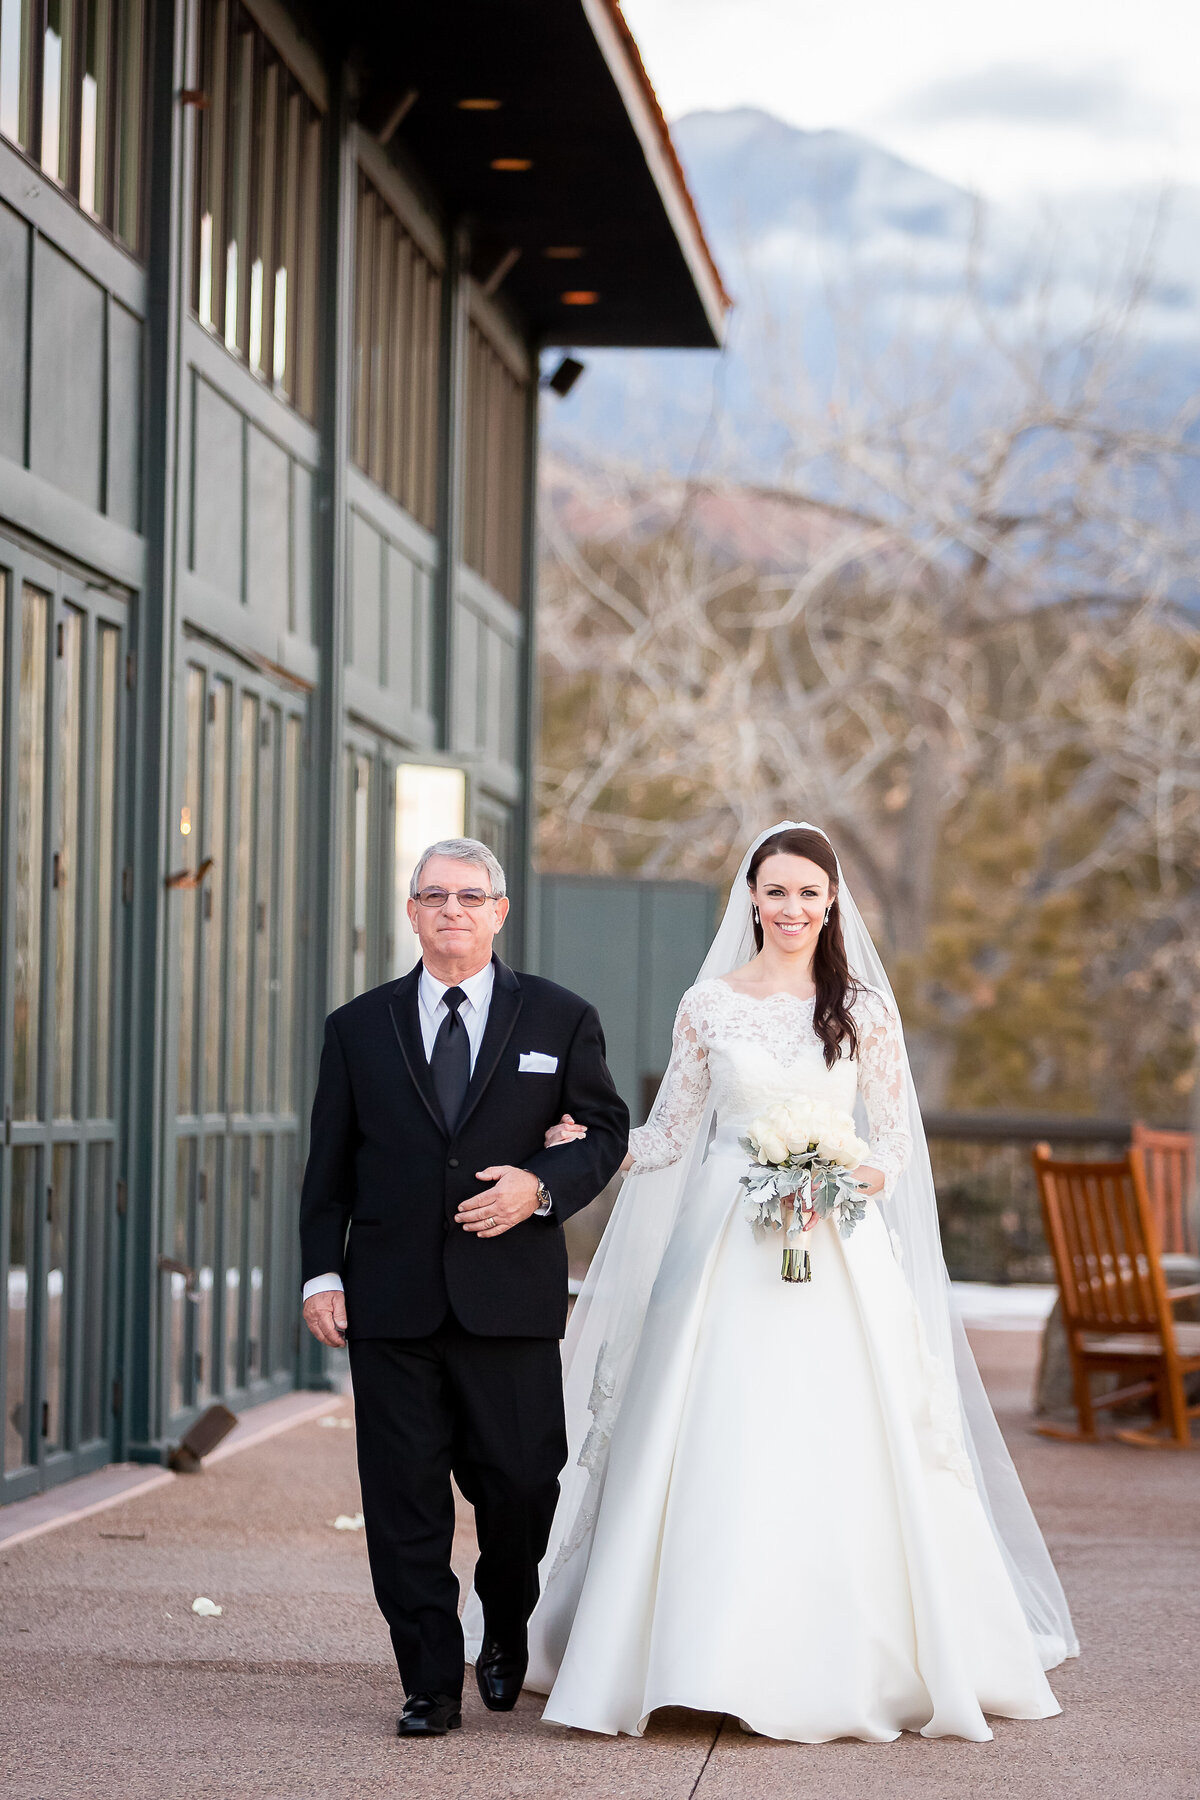 A Father Walks his Daughter down the aisle to get married, Broadmoor